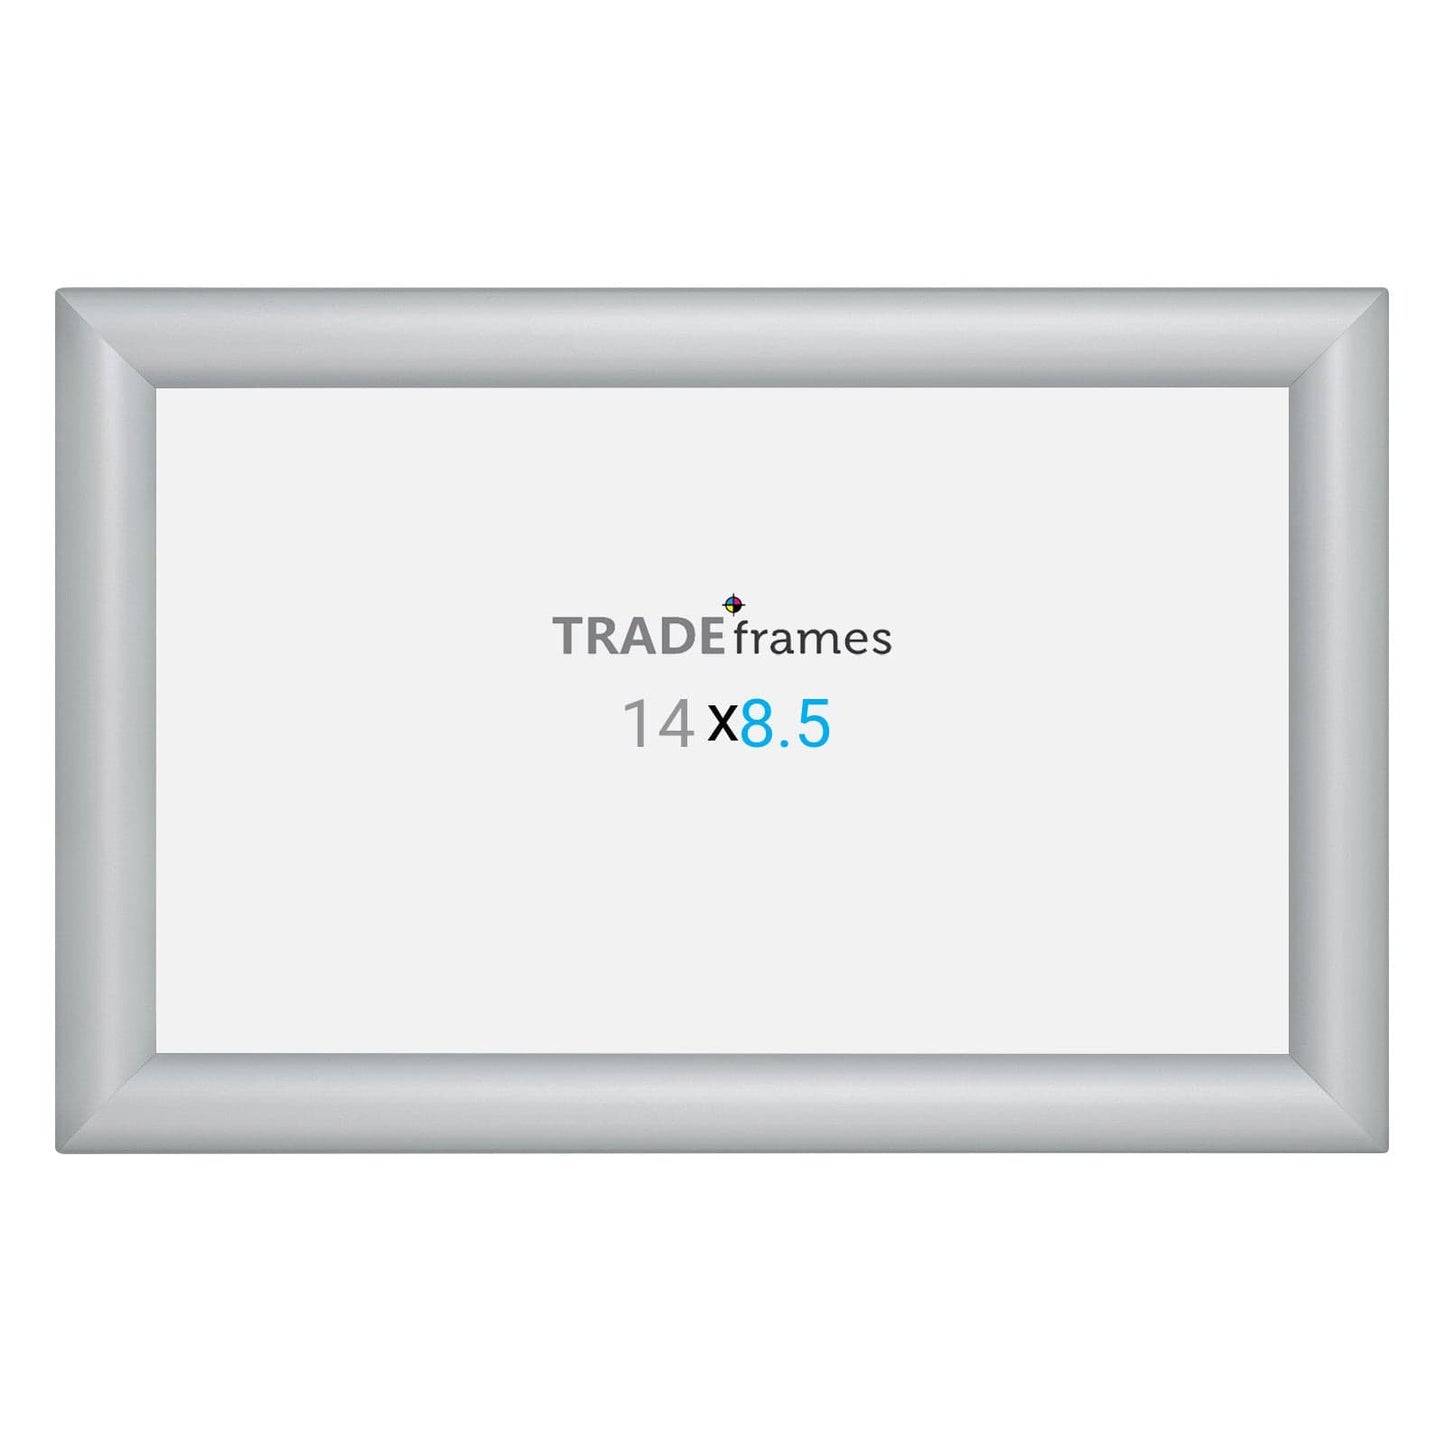 8.5x14 TRADEframe Silver Snap Frame 8.5x14 - 1.2 inch profile - Snap Frames Direct